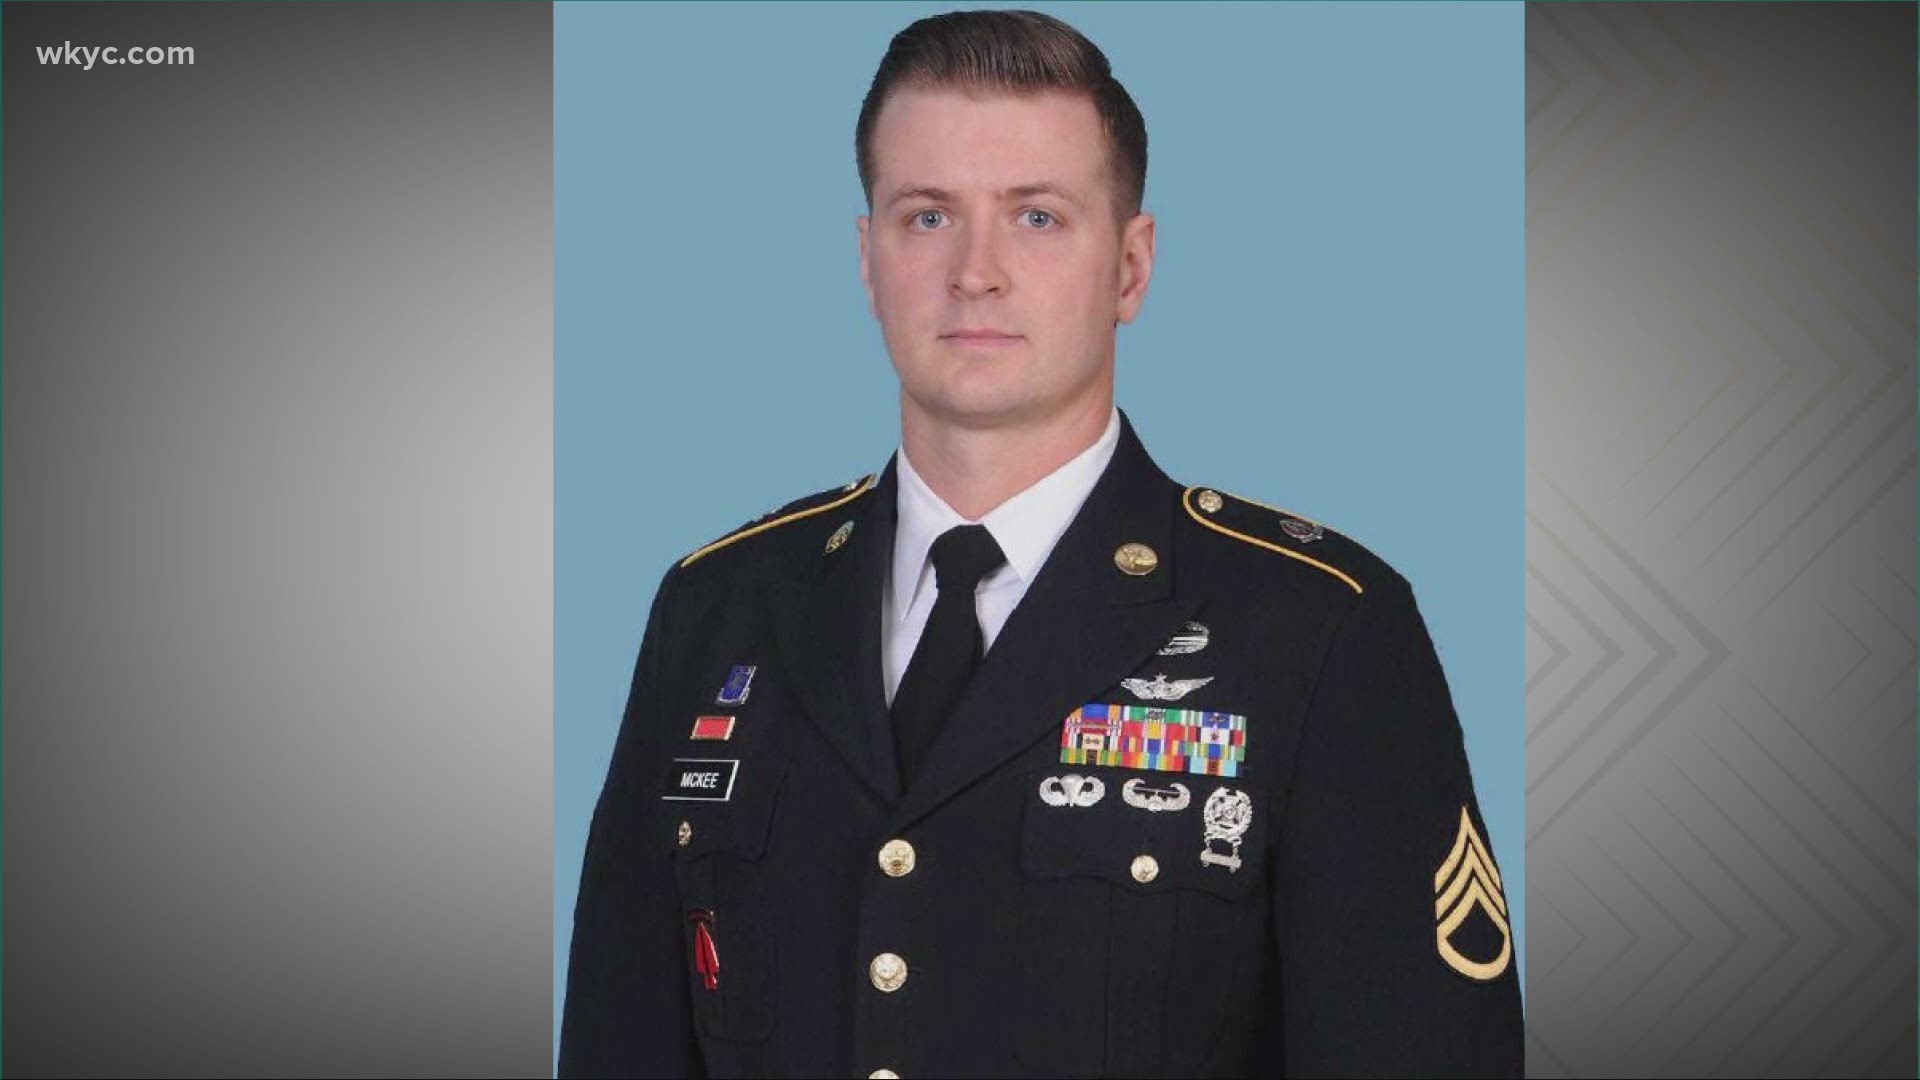 Sgt. Kyle McKee was killed in the line of duty in Egypt last November.